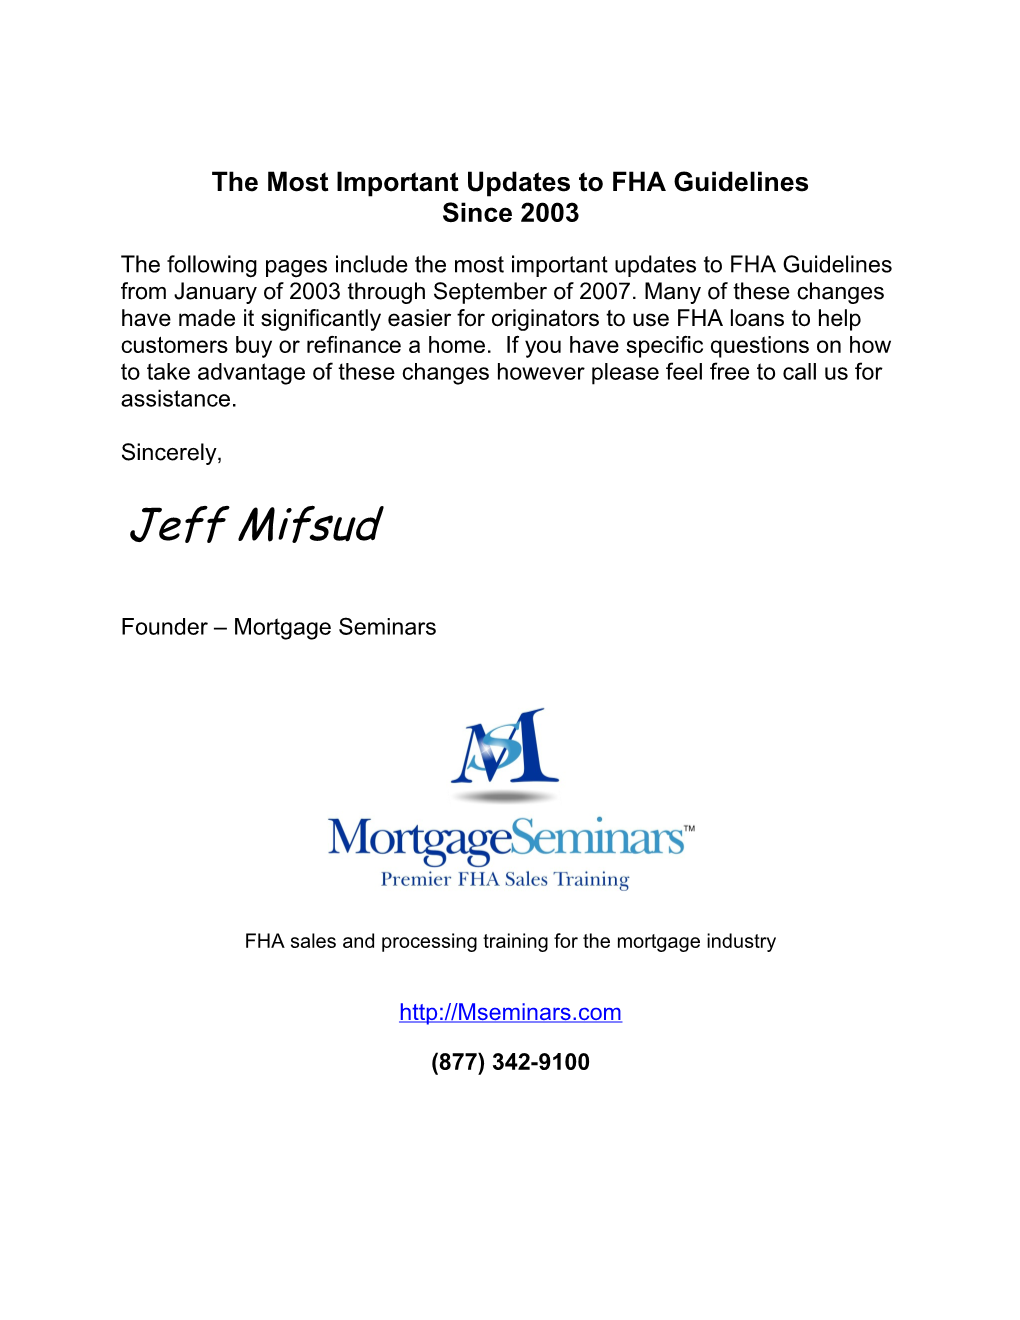 The Most Important Updates to FHA Guidelines